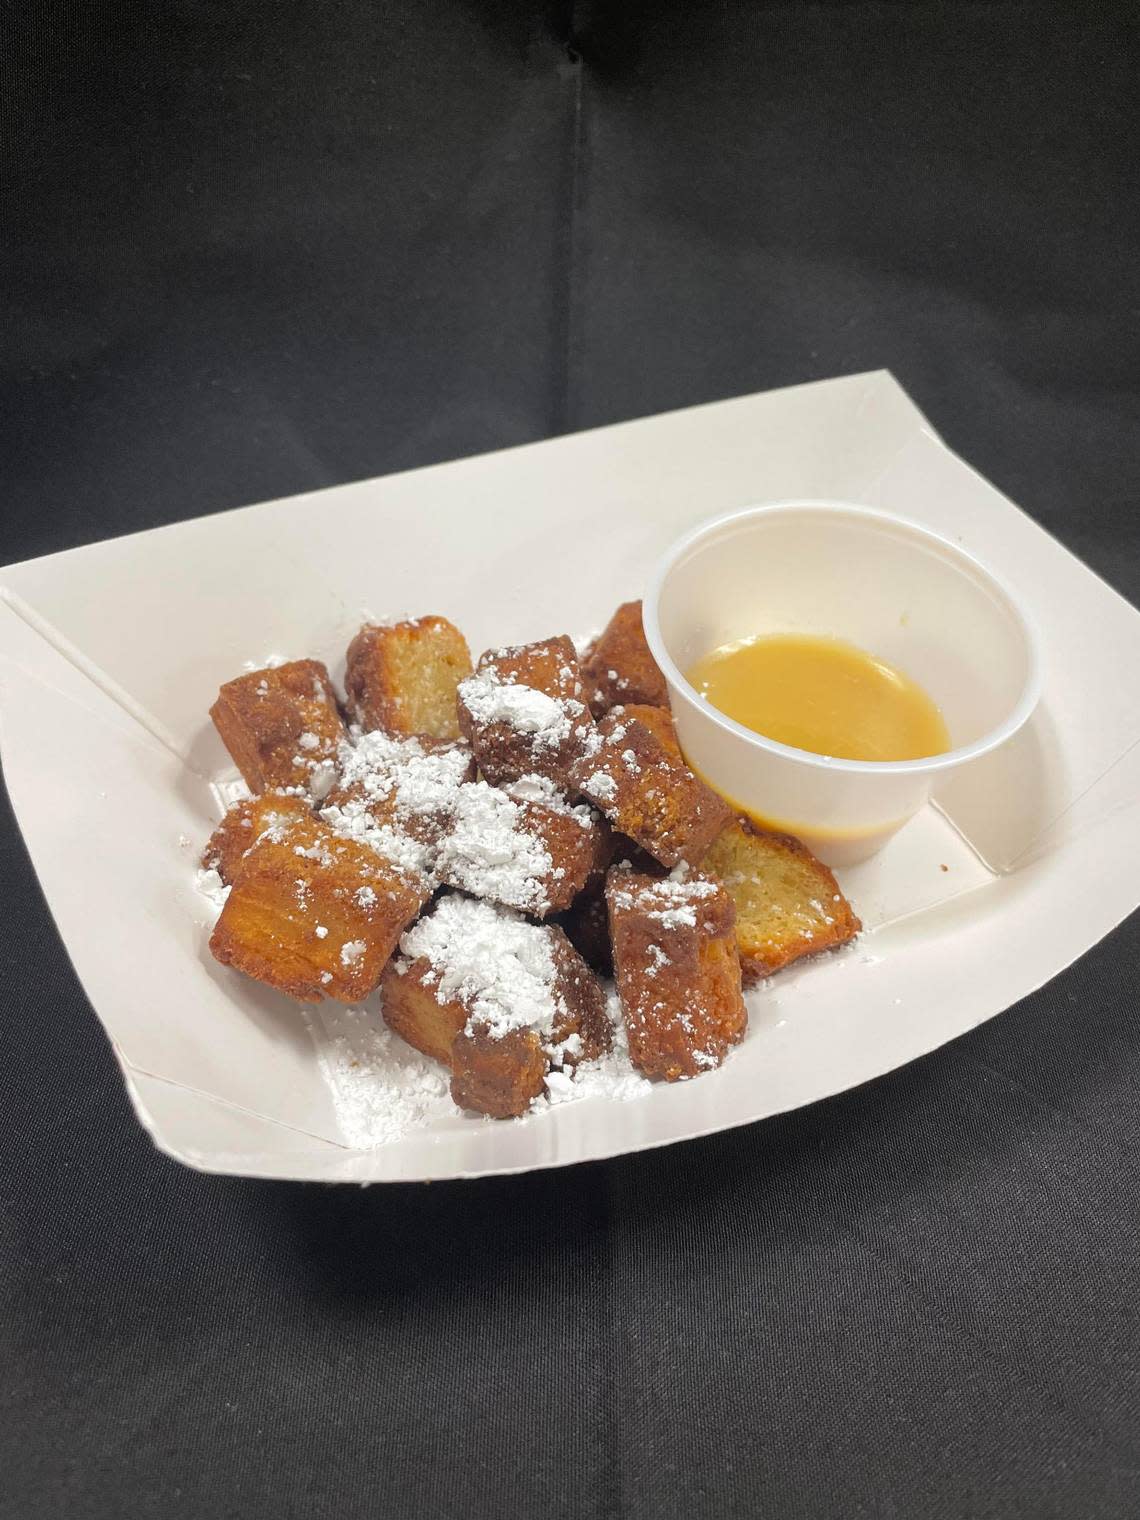 Fried bread pudding with caramel sauce from the new Root 76 Cuisine food truck.